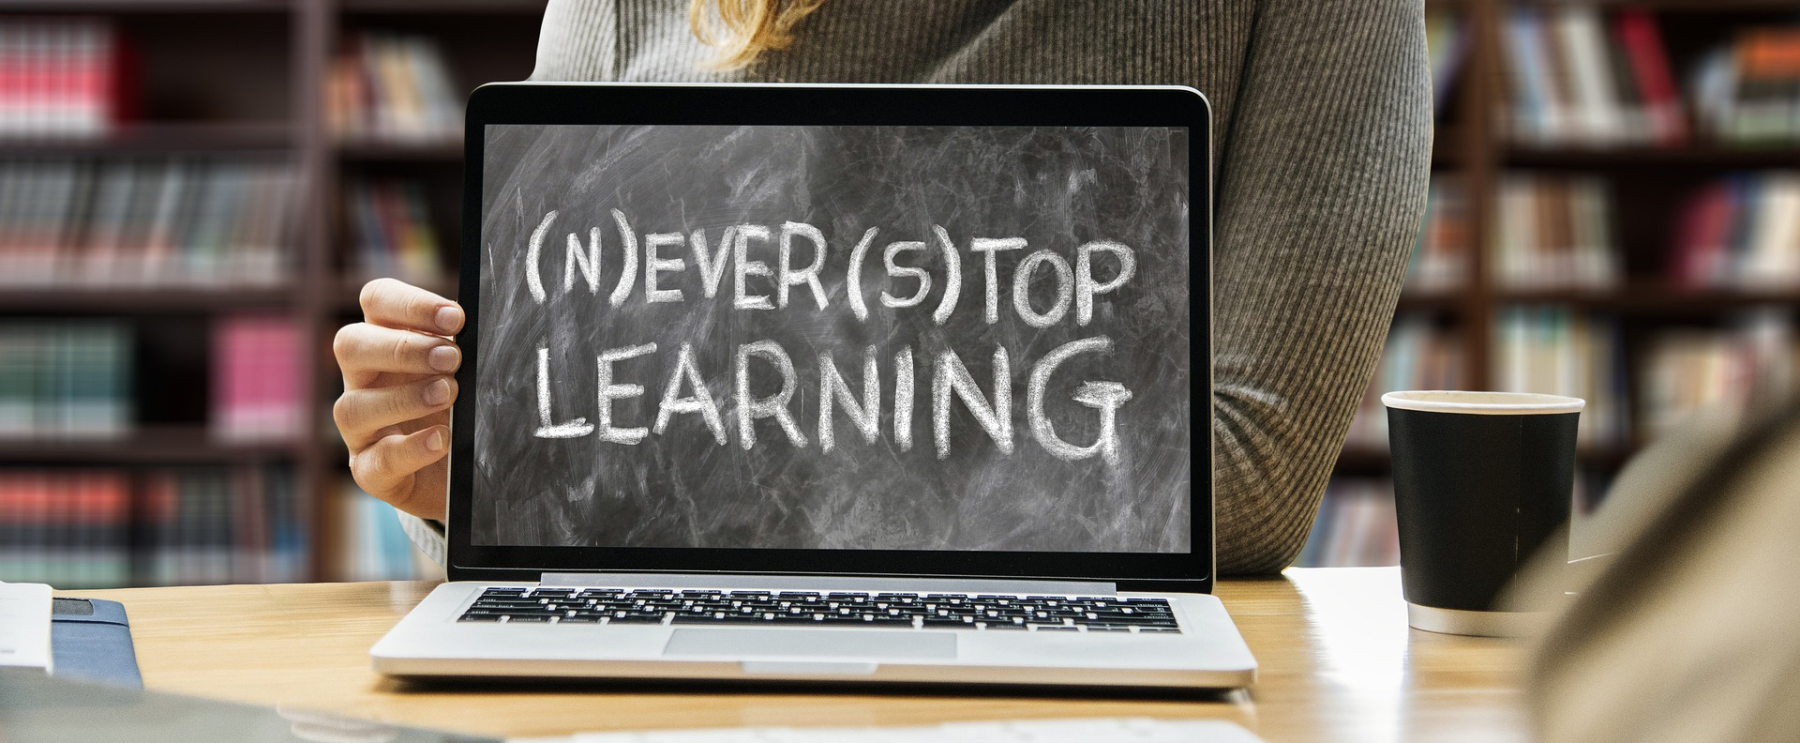 1-never-stop-learning-g854f2766f_1920.png